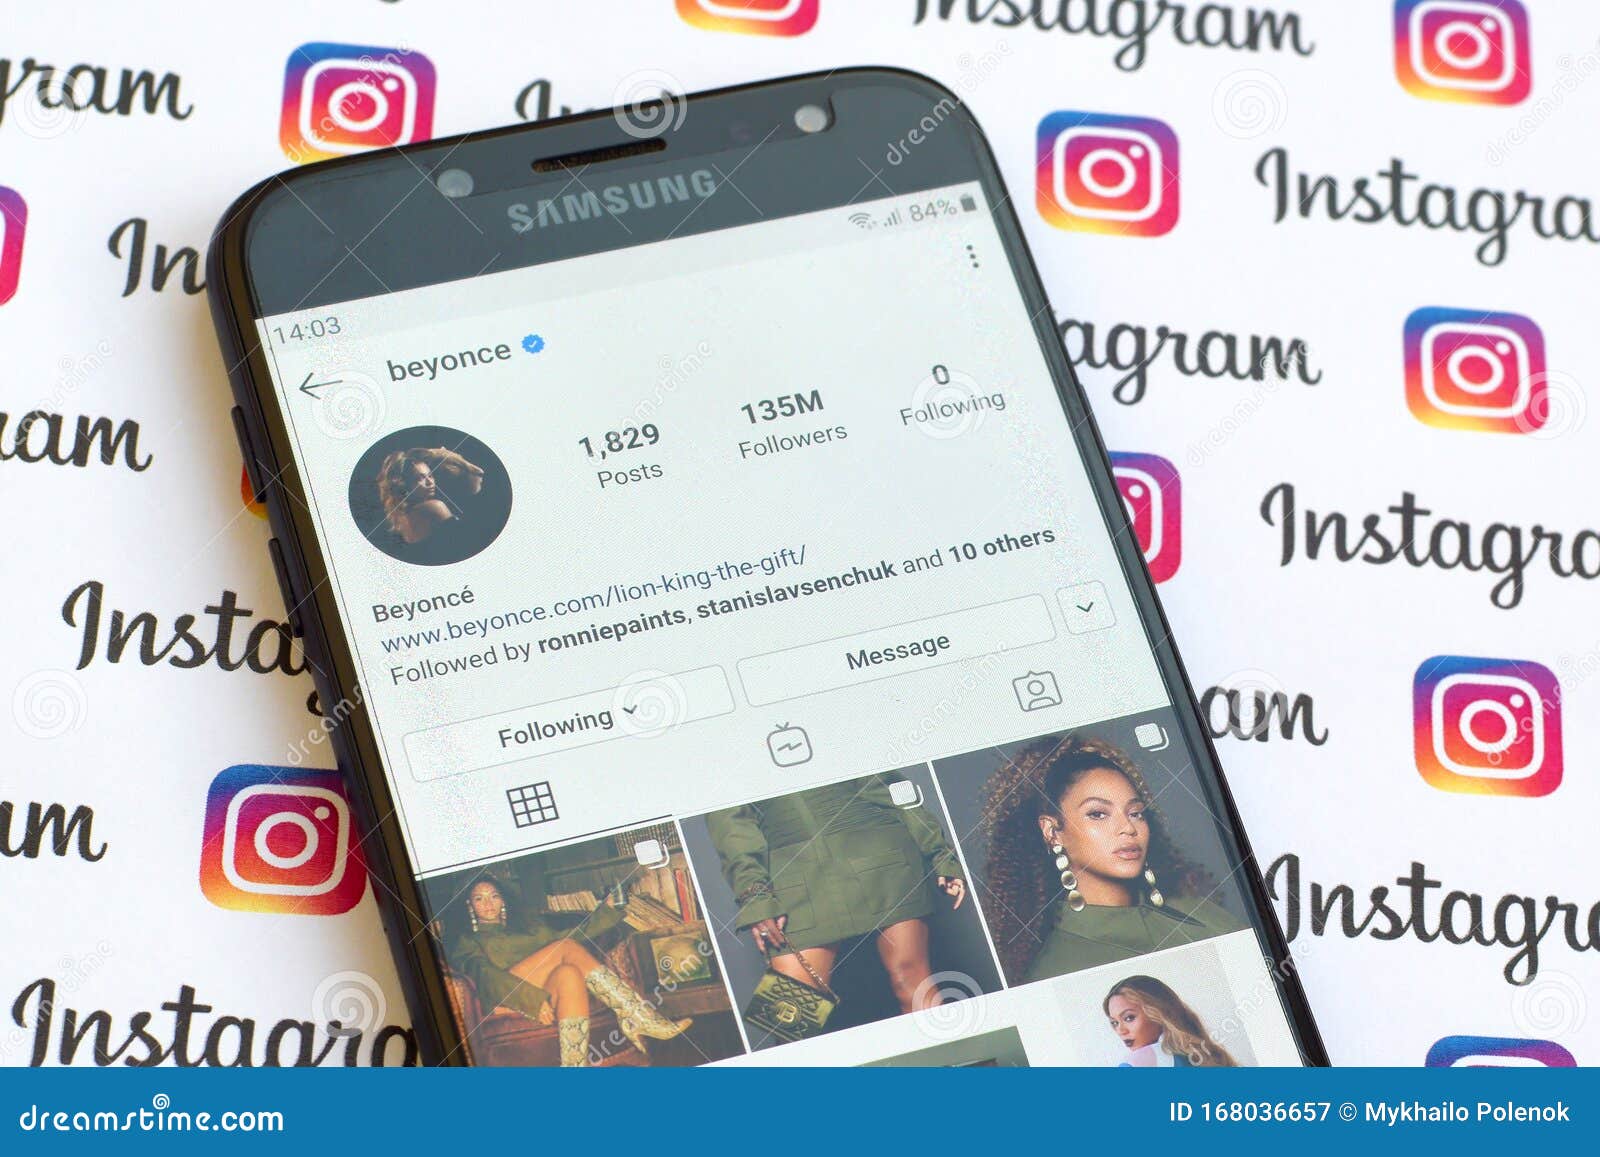 Beyonce Official Instagram Account On Smartphone Screen On Paper Instagram Banner Editorial Photography Image Of Igtv Banner